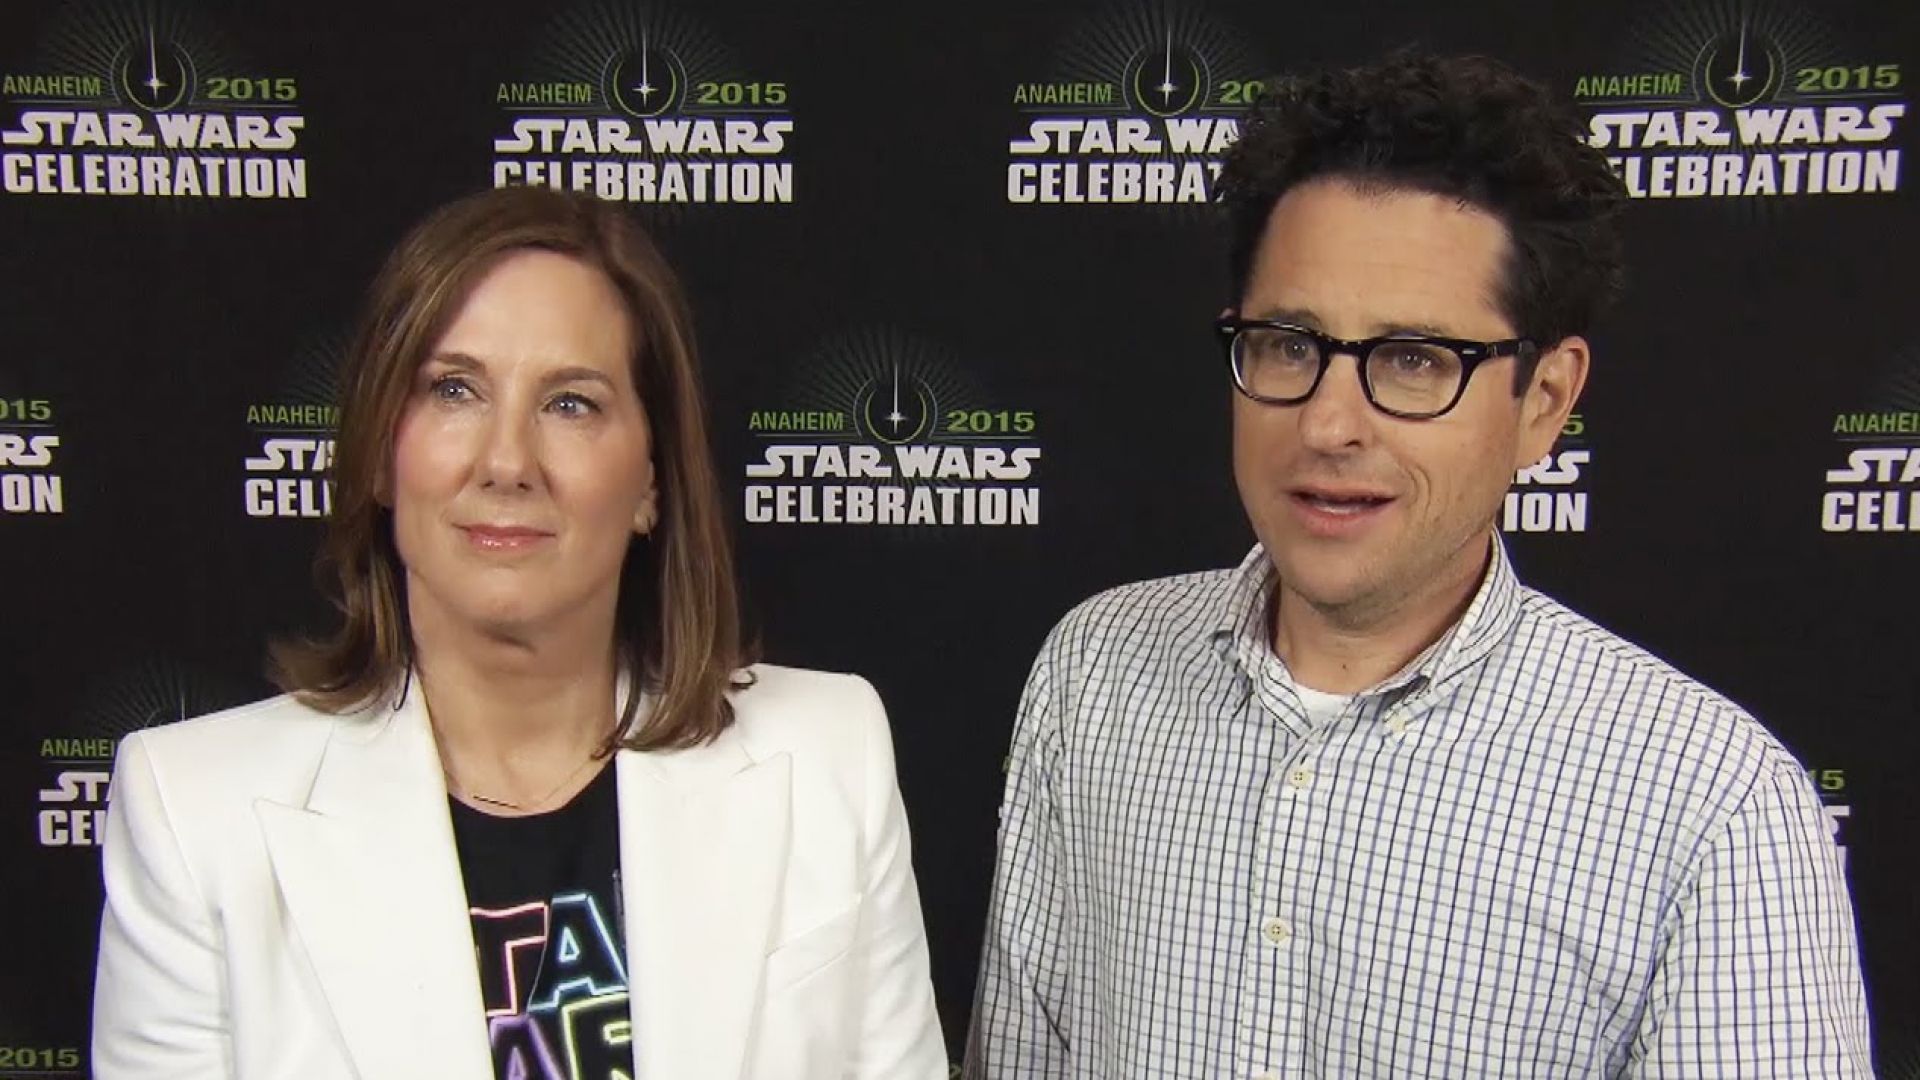 Kathleen Kennedy and J.J. Abrams Talk About Their Star Wars 